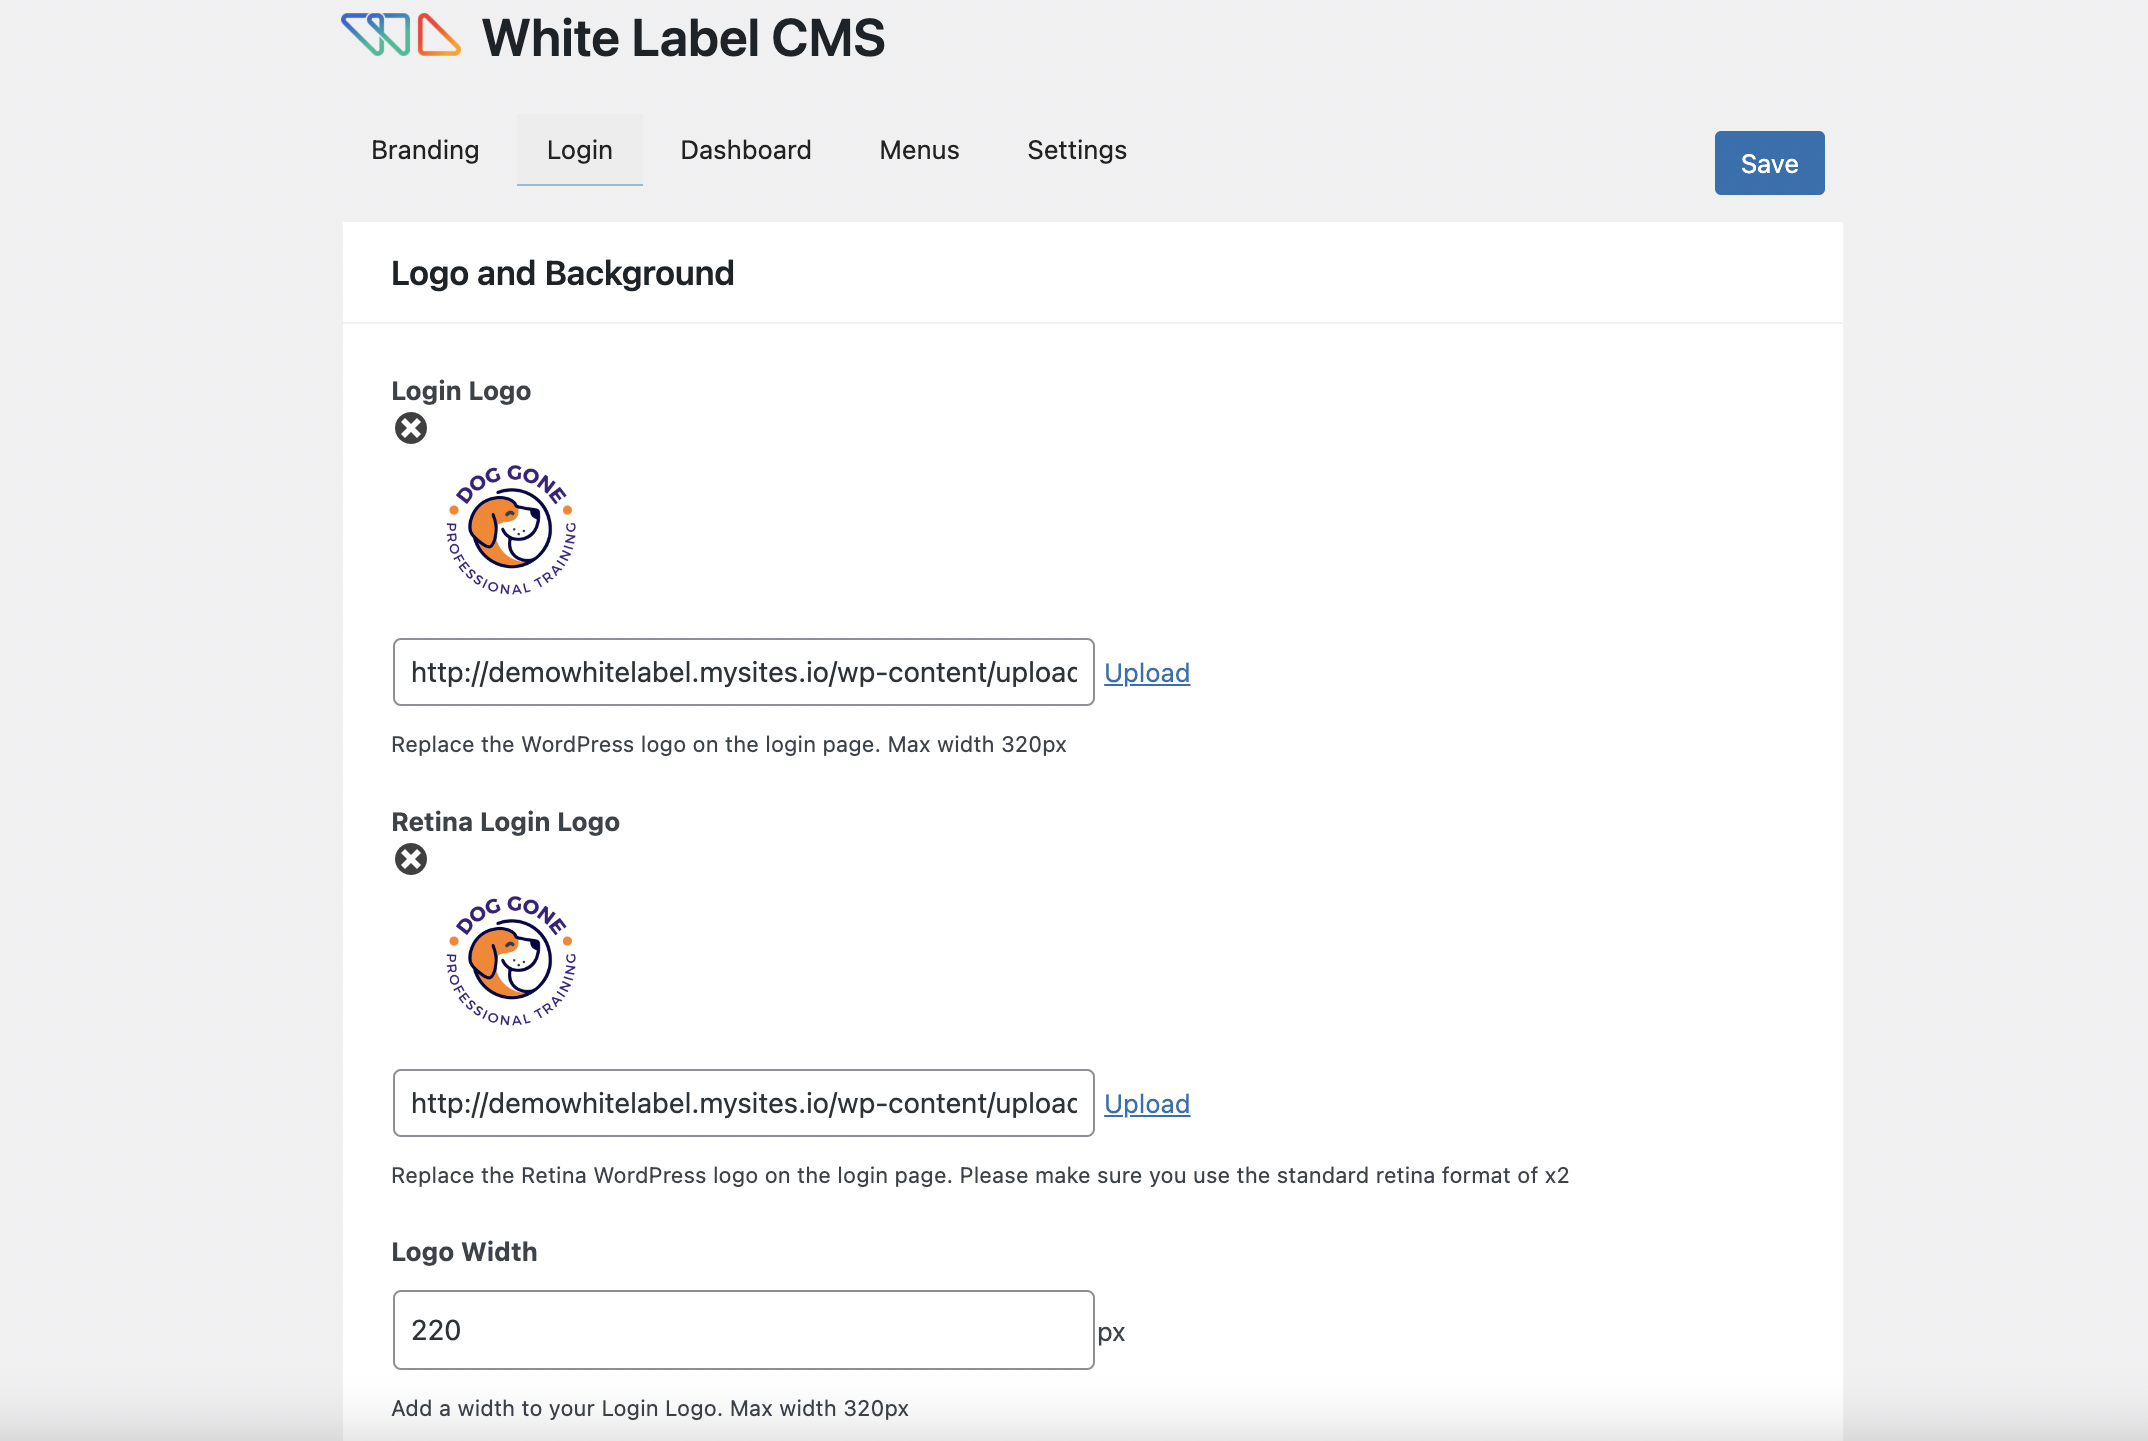 white label cms login page logo and background